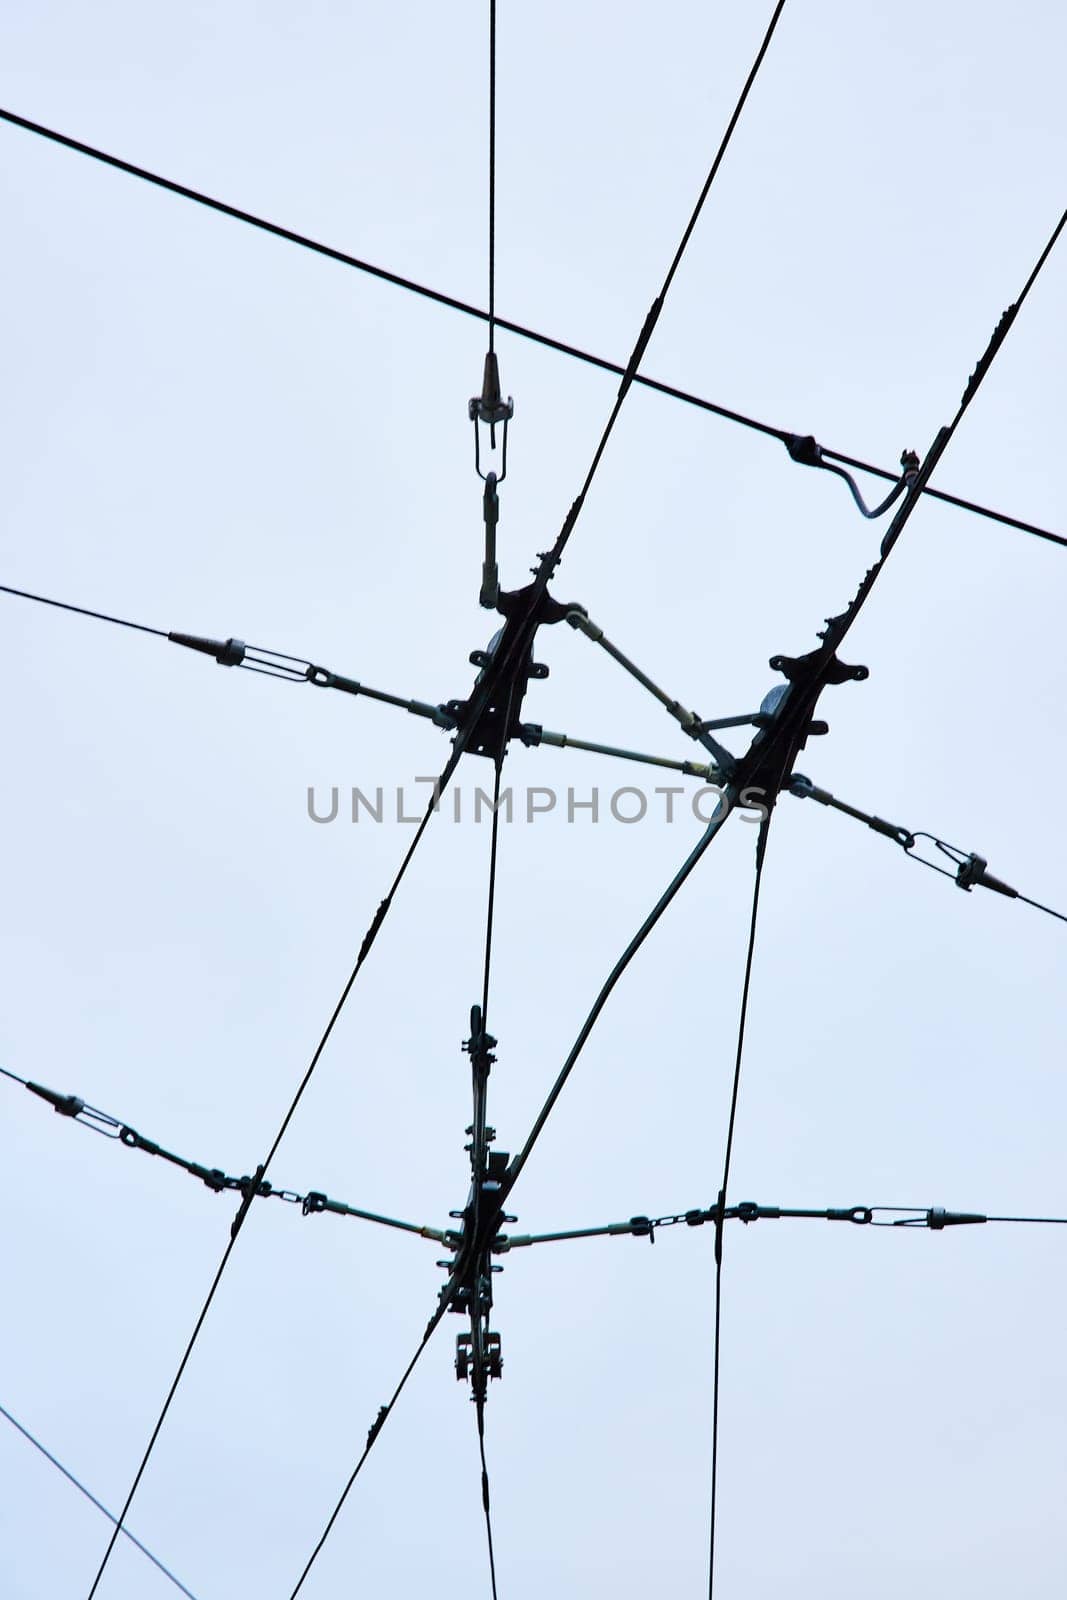 Image of Wires for city transportation clean electric energy upward abstract view with overcast sky